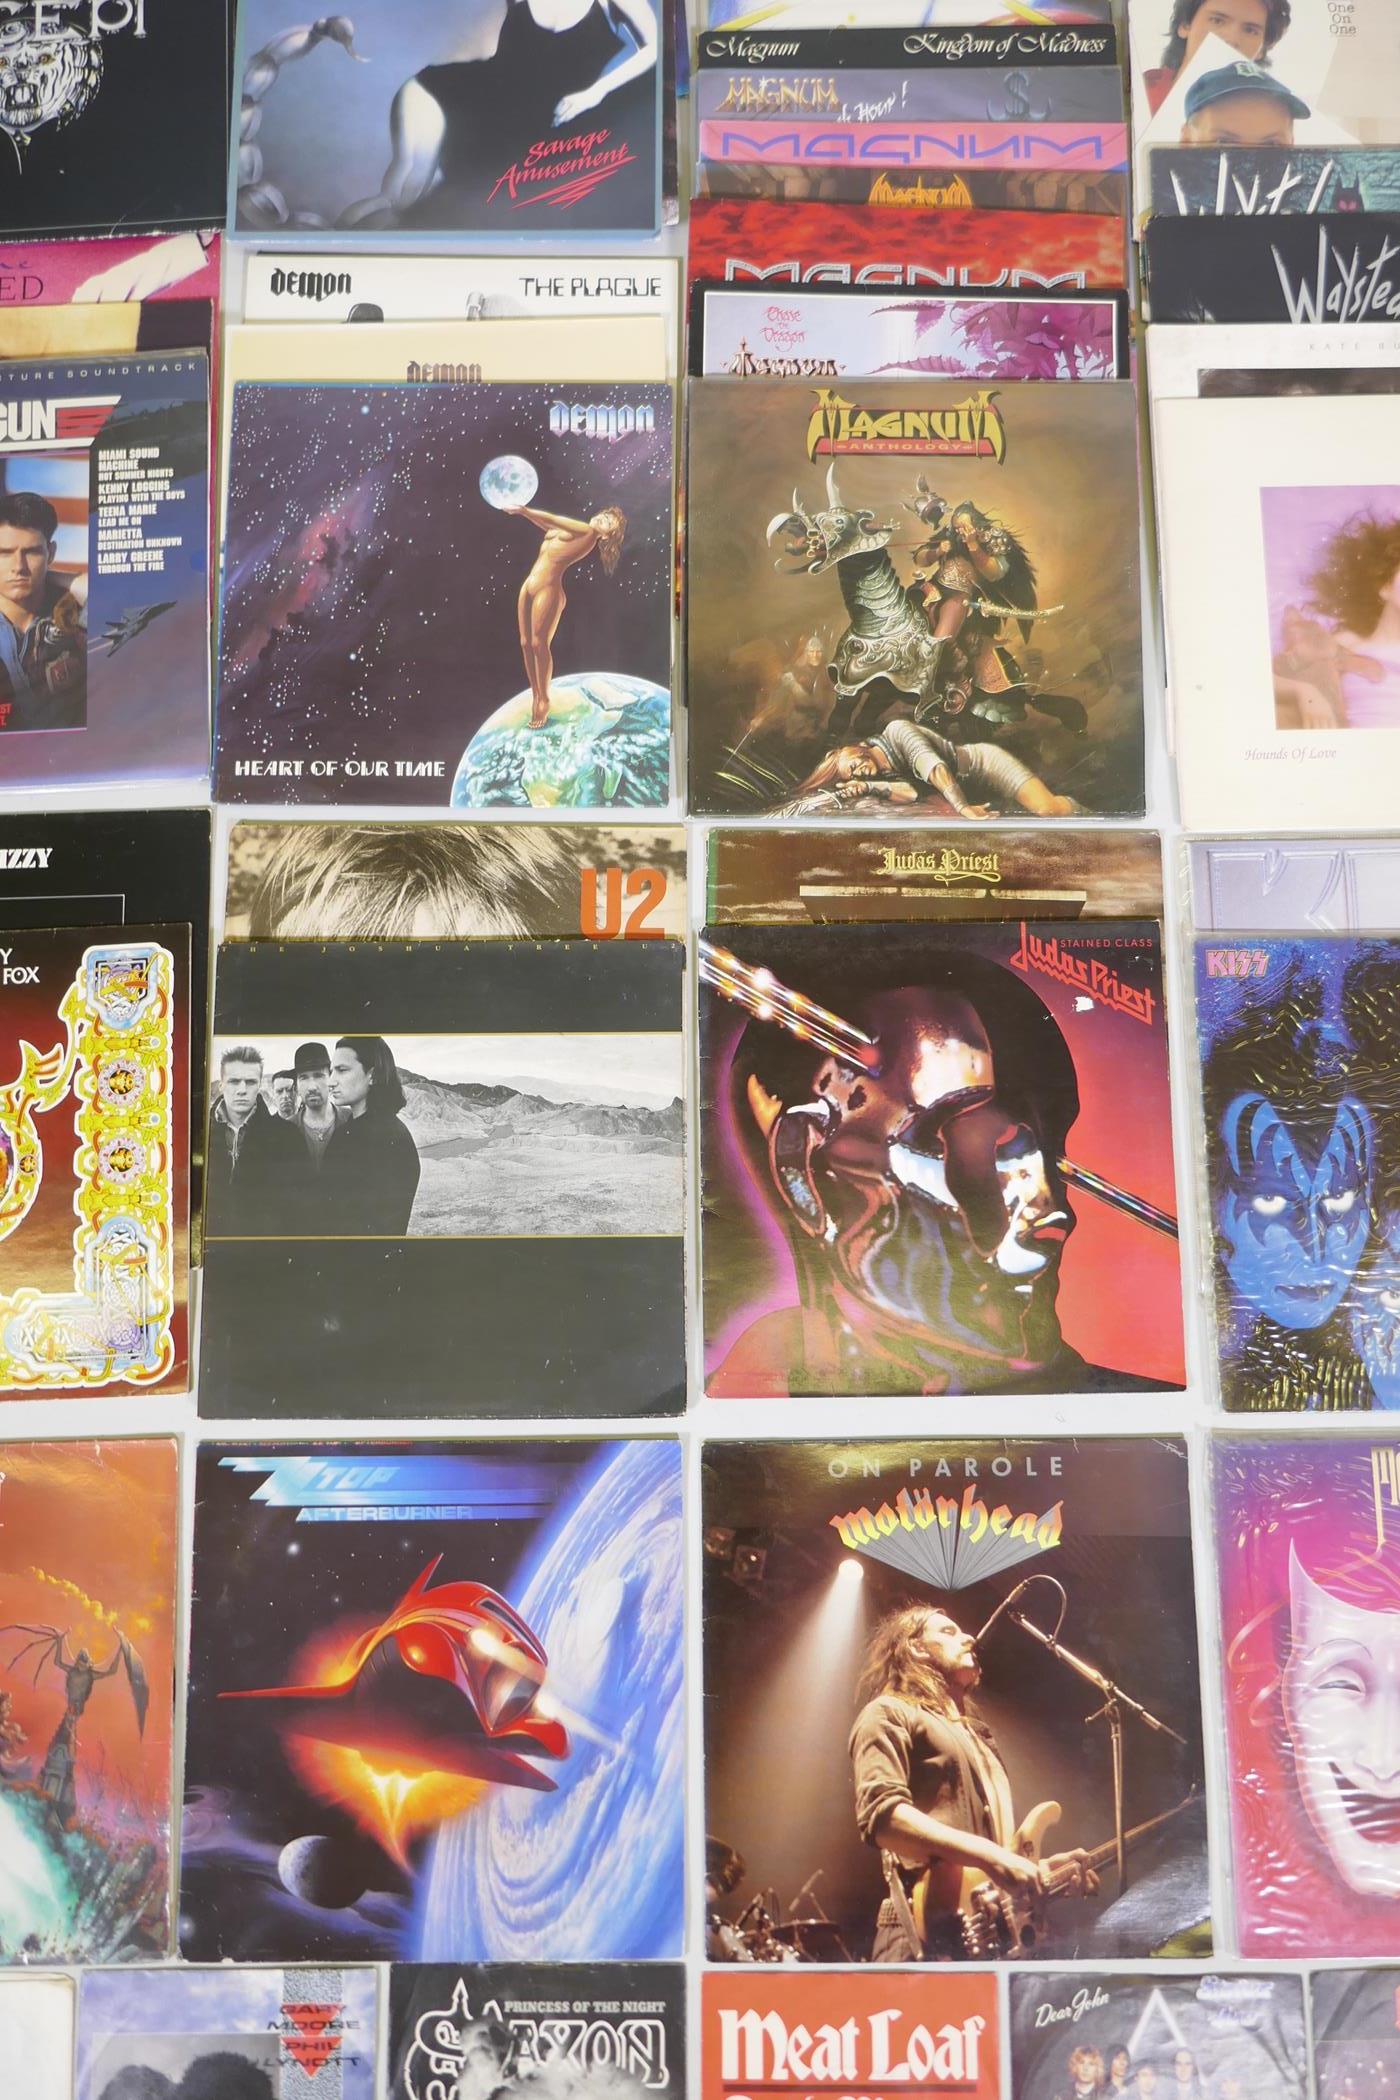 A quantity of 12" metal and rock vinyl LPs including Metallica, Meatloaf, Thin Lizzy, Motorhead, - Image 7 of 16